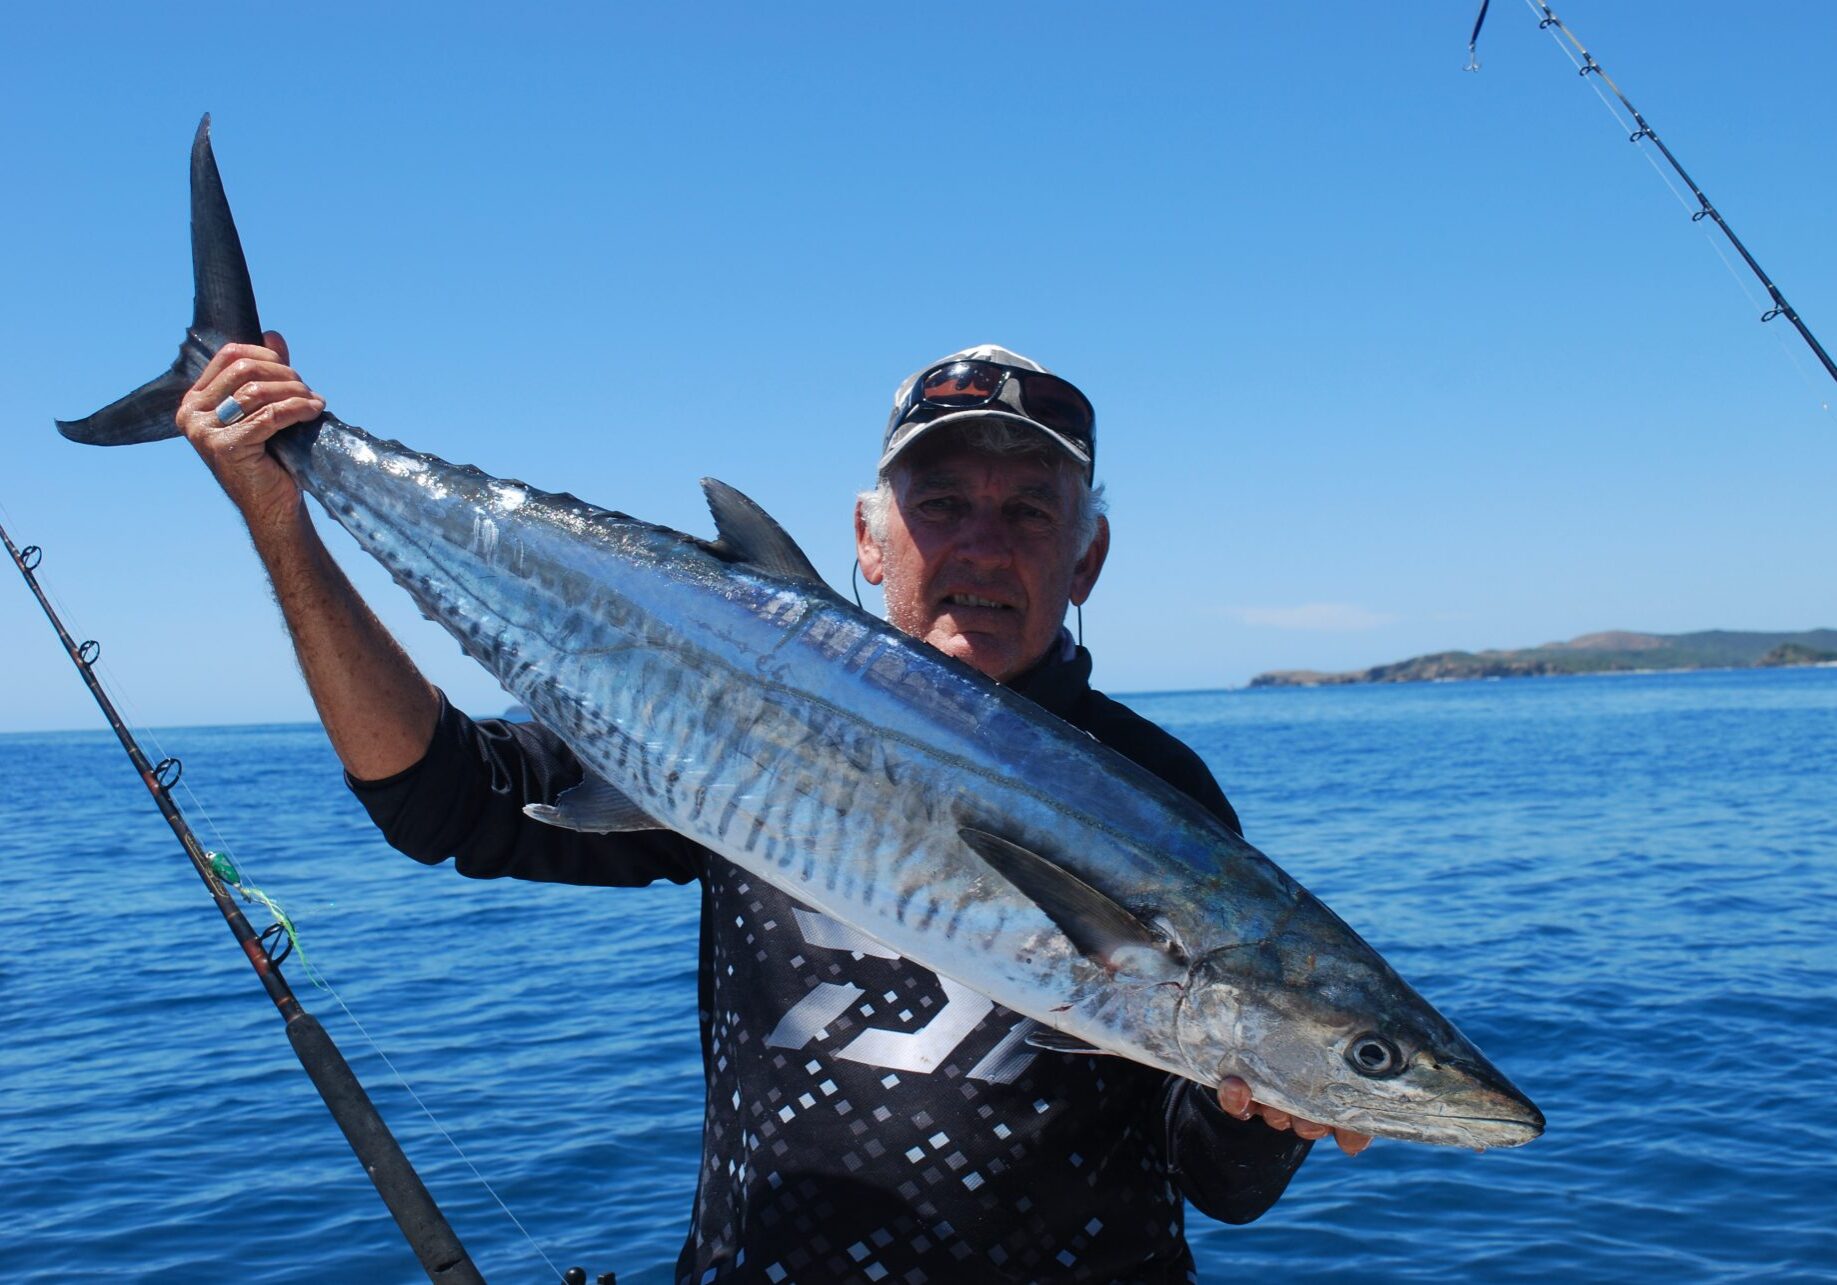 A beautifully conditioned 10kg Spanish from the Keppel island area. It pays to know the ideal tides, weather conditions, preferred baits, trolling depths and time of year for consistent catches.